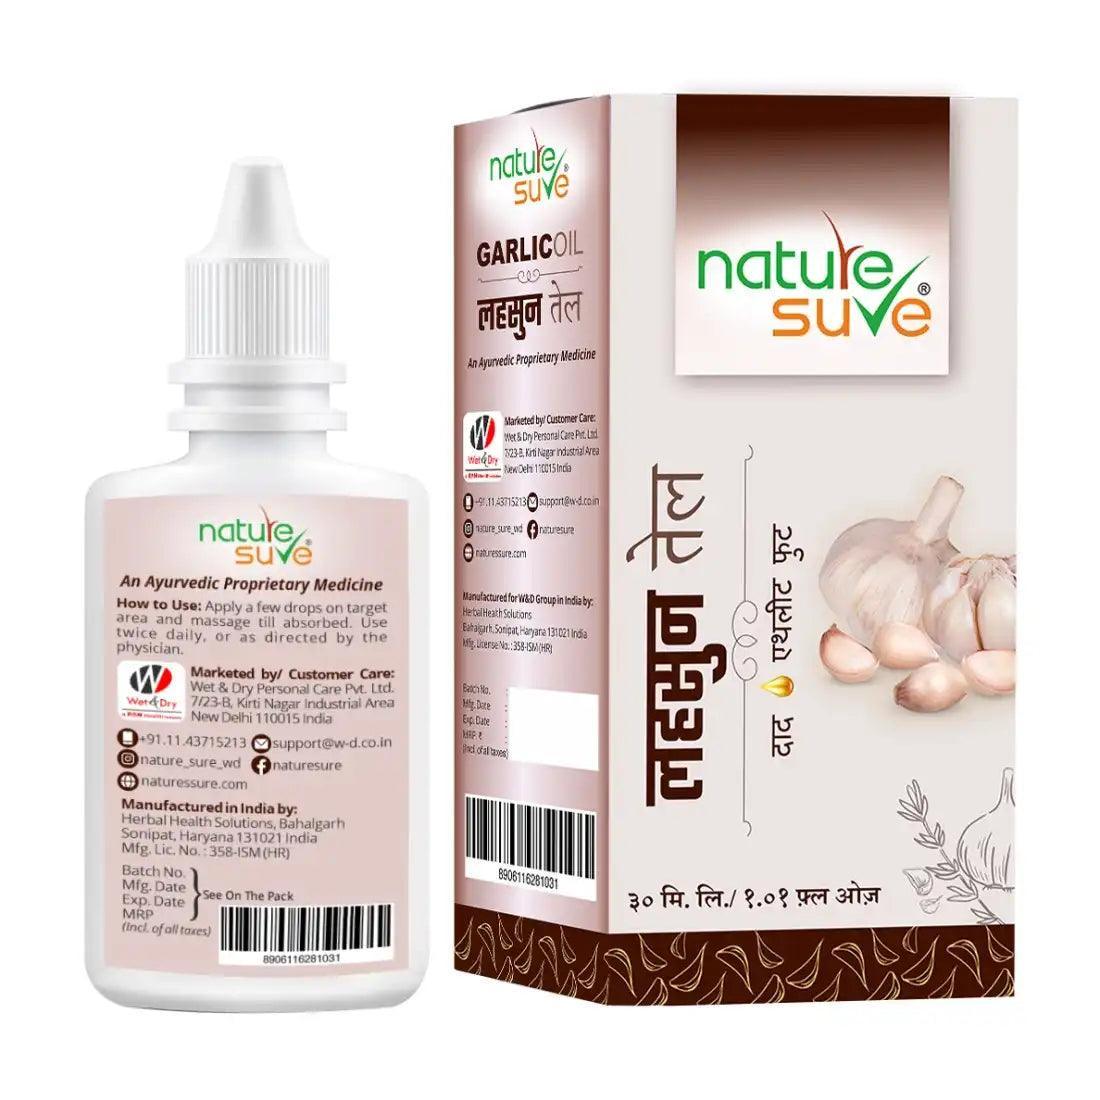 Nature Sure Garlic Oil for Ringworm and Athlete's Foot is Shipped Worldwide - everteen-neud.com